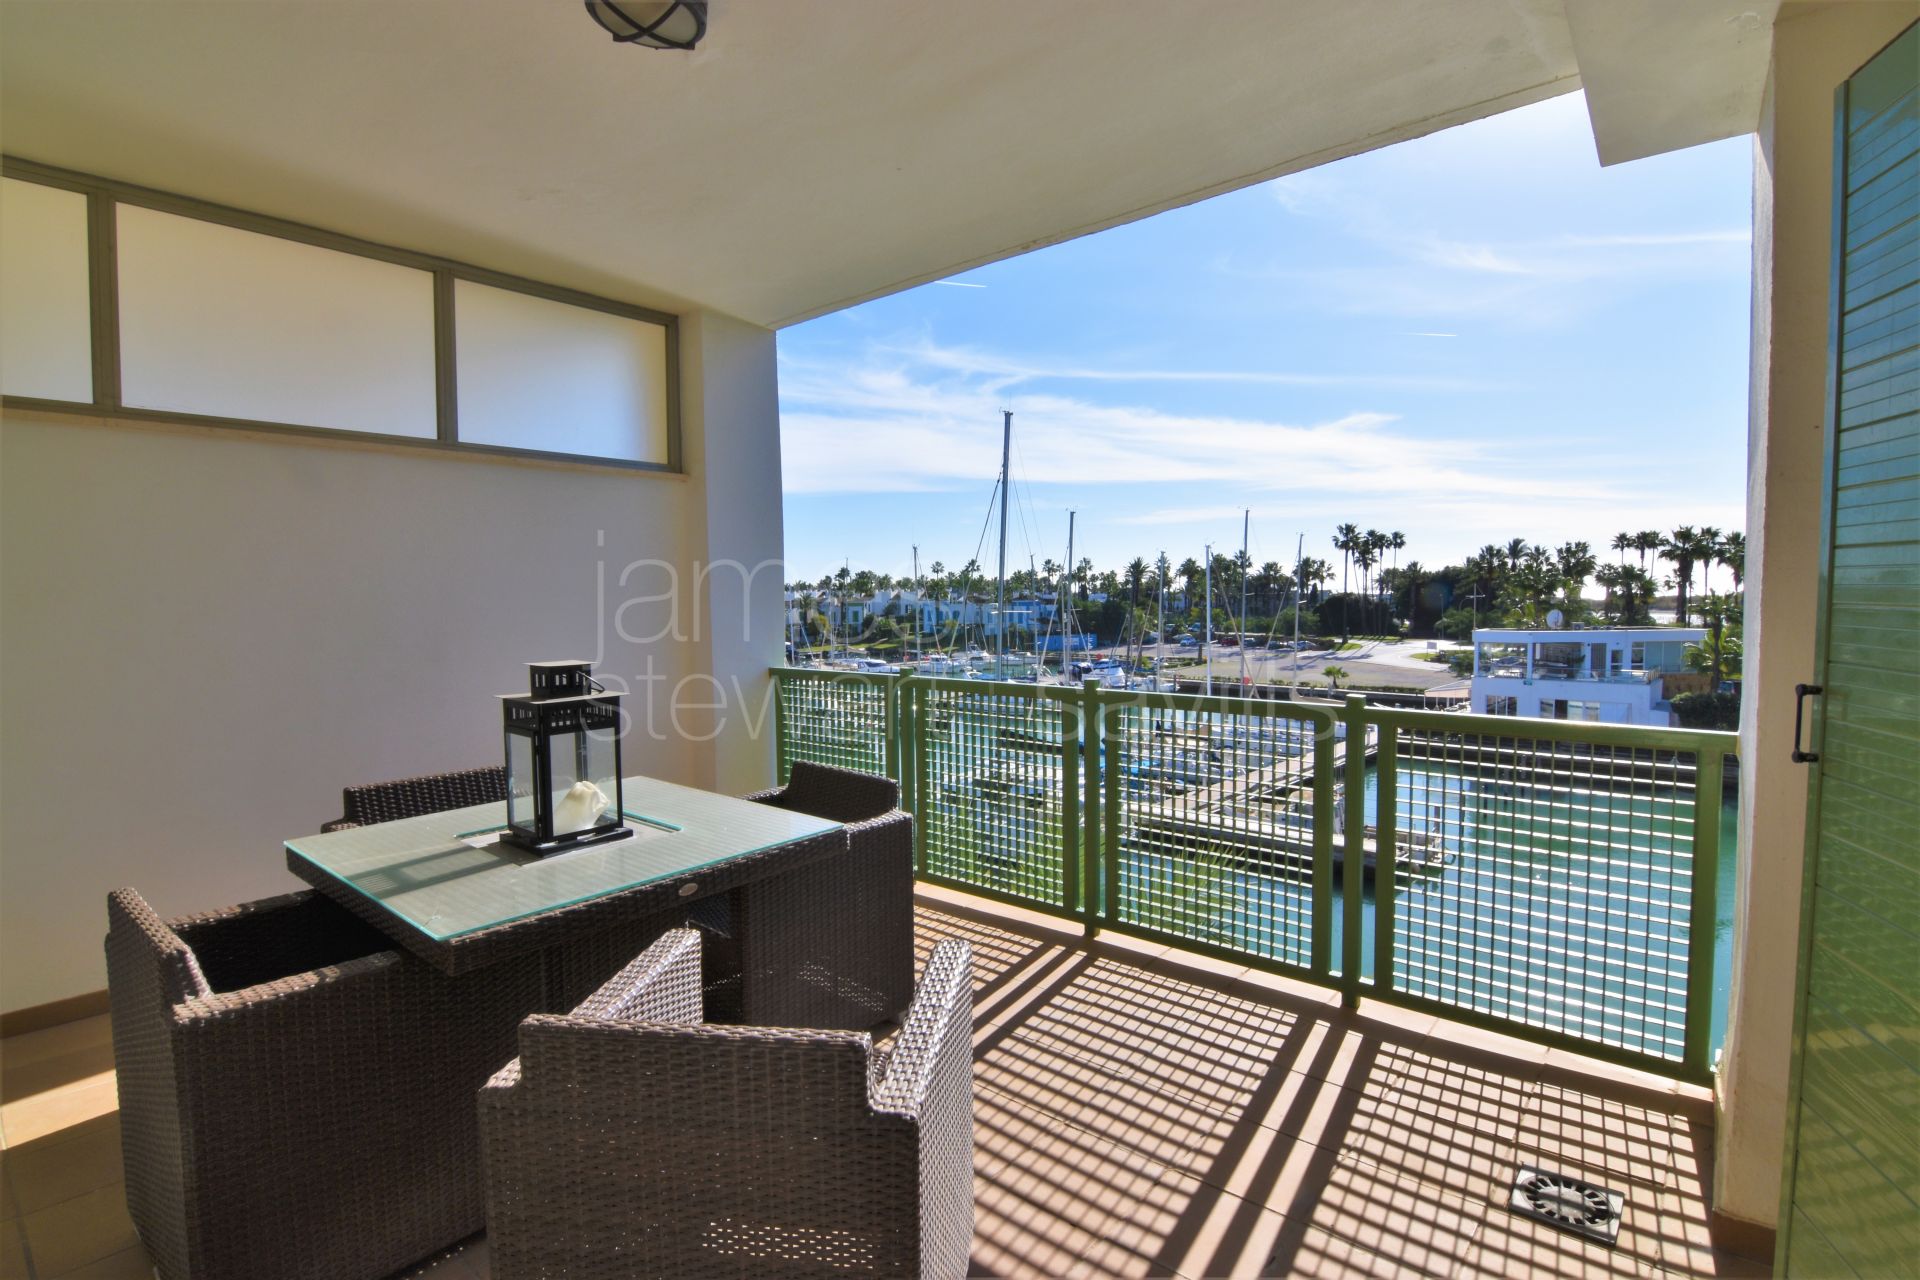 South-east facing 3 bedroom apartment with lovely elevated Marina views